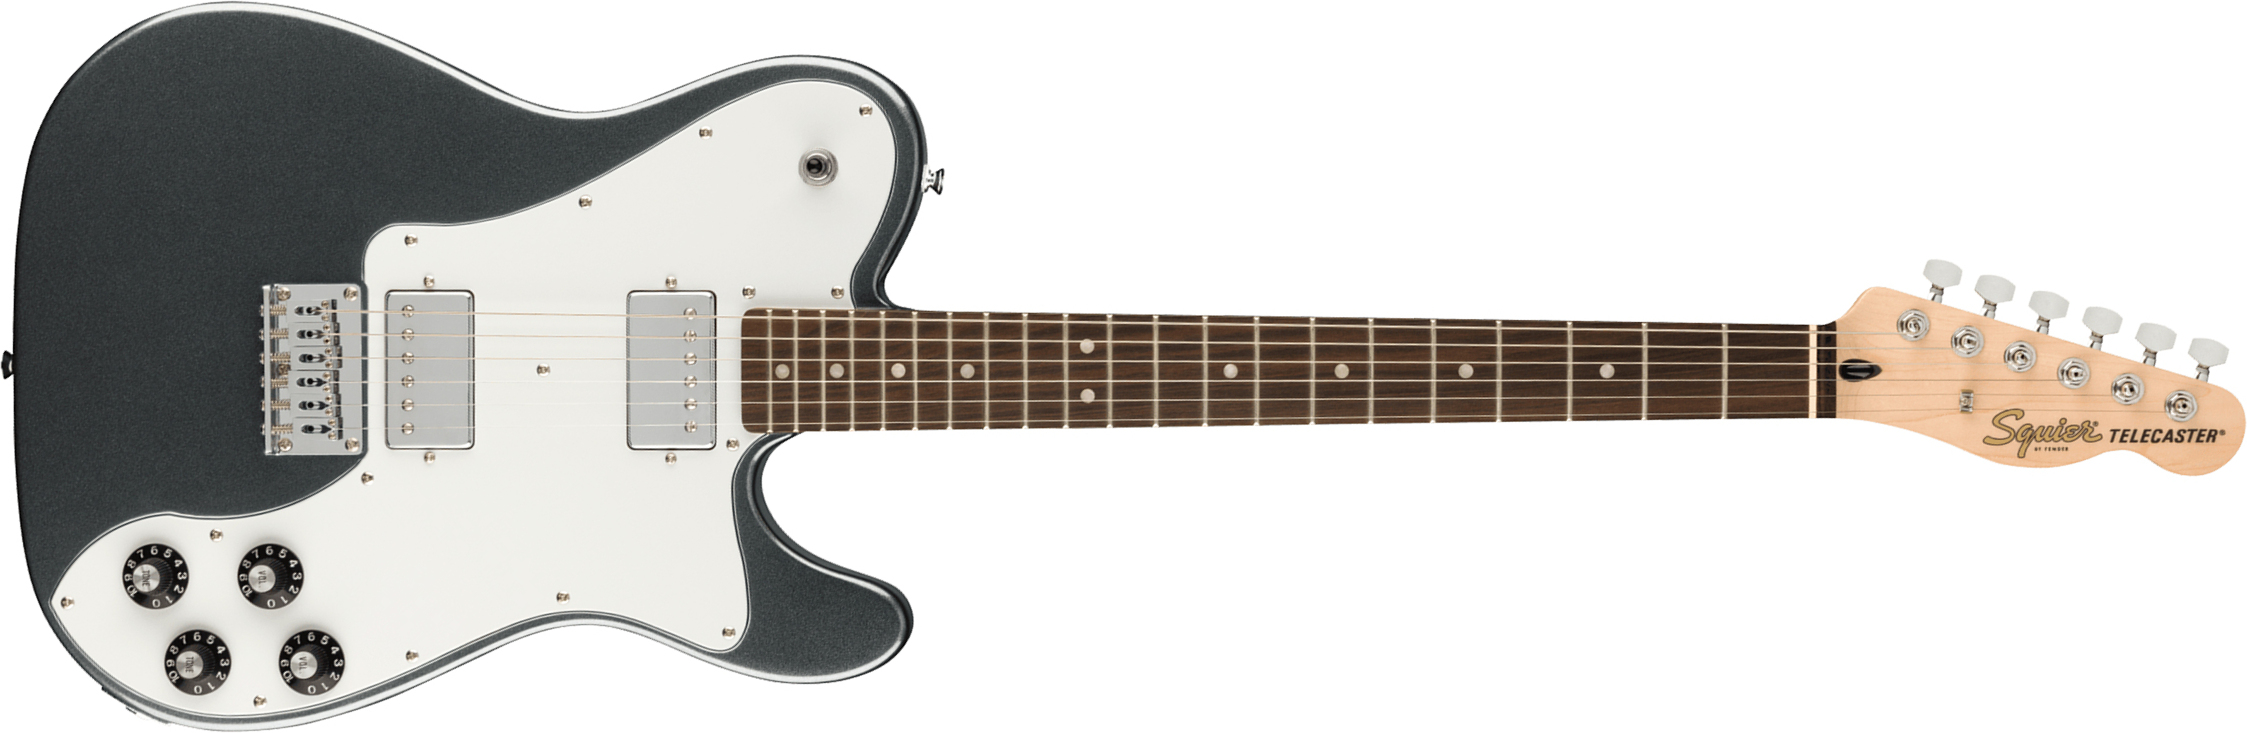 Squier Tele Affinity Deluxe 2021 Hh Ht Lau - Charcoal Frost Metallic - E-Gitarre in Teleform - Main picture